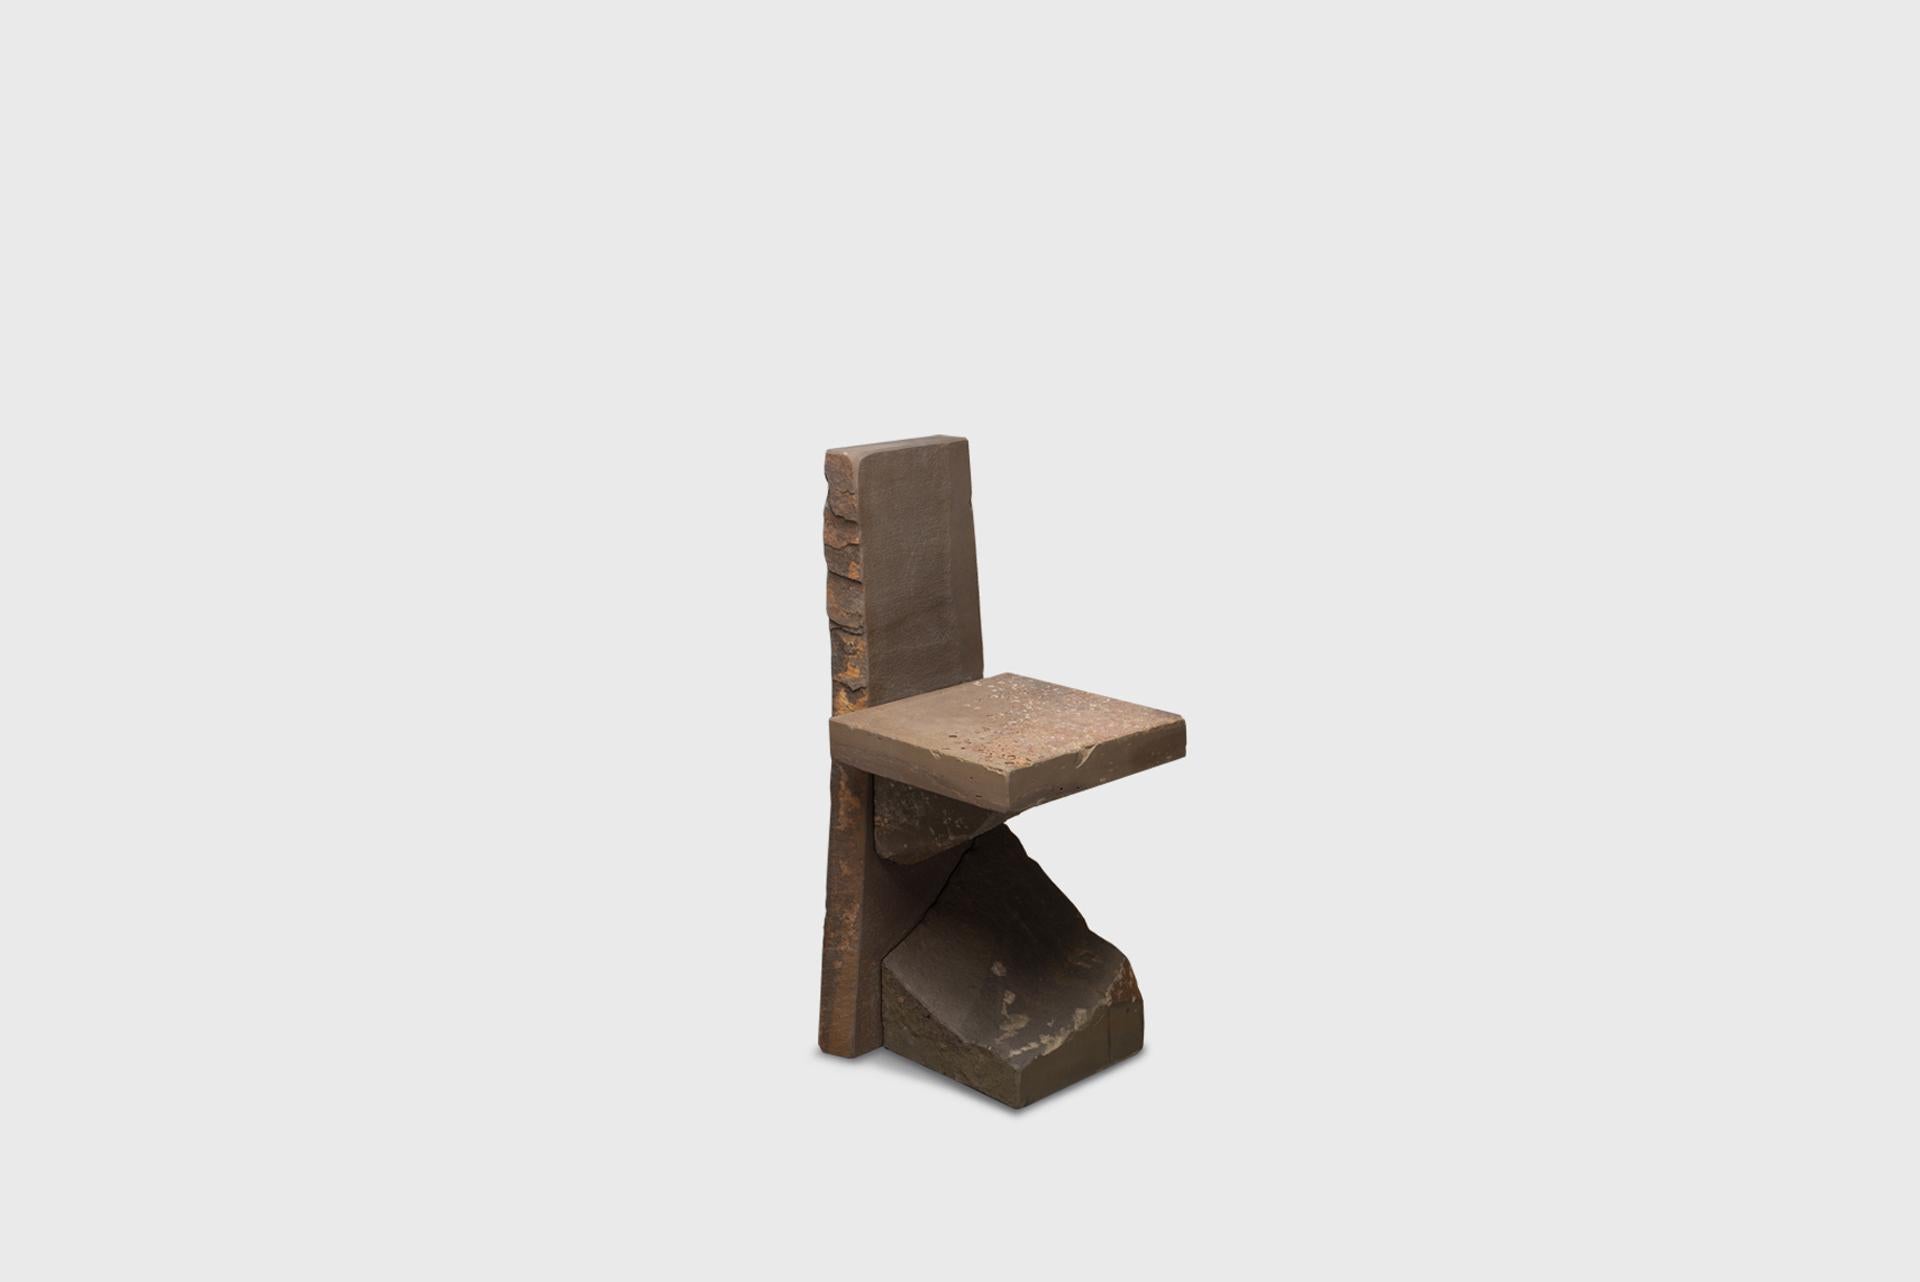 Contemporary Natural Chair 21, Graywacke Offcut Gray Stone, Carsten in Der Elst For Sale 6